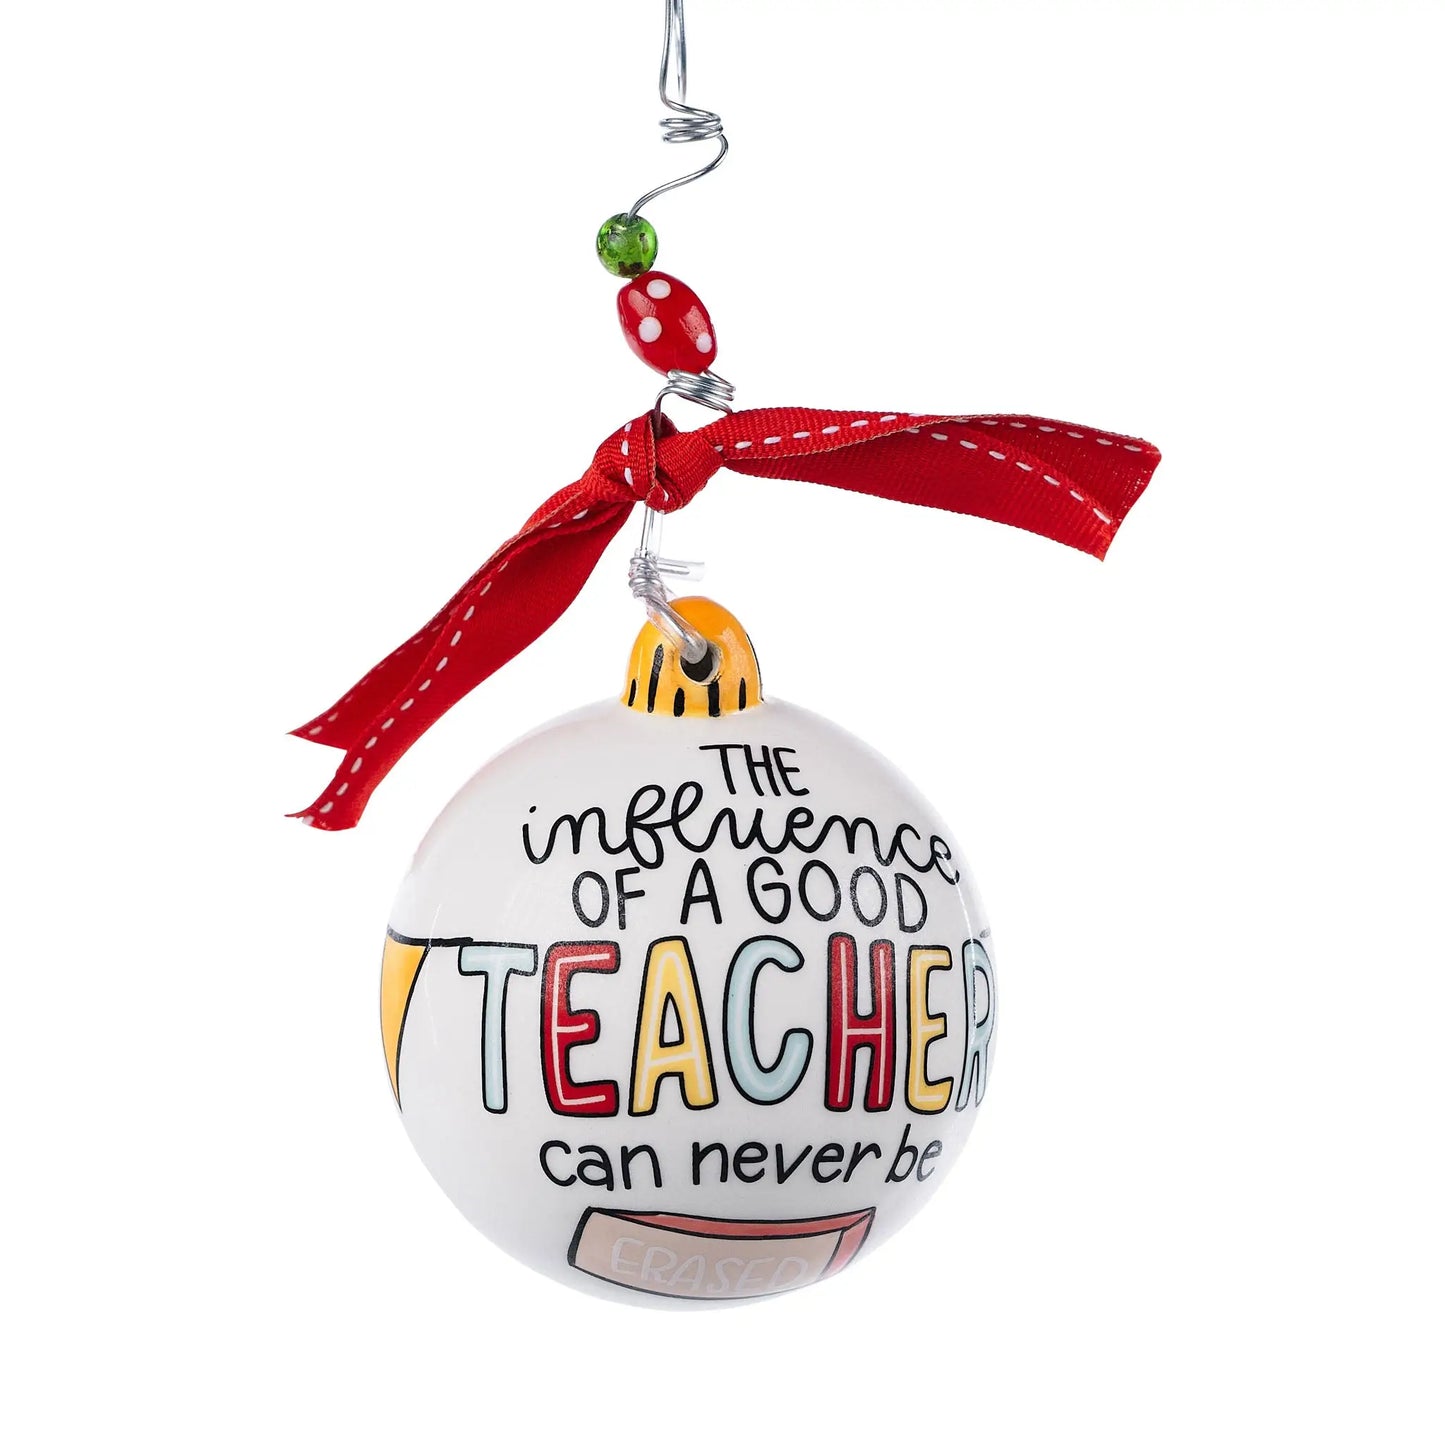 "Teachers Can Never be Erased" Ornament